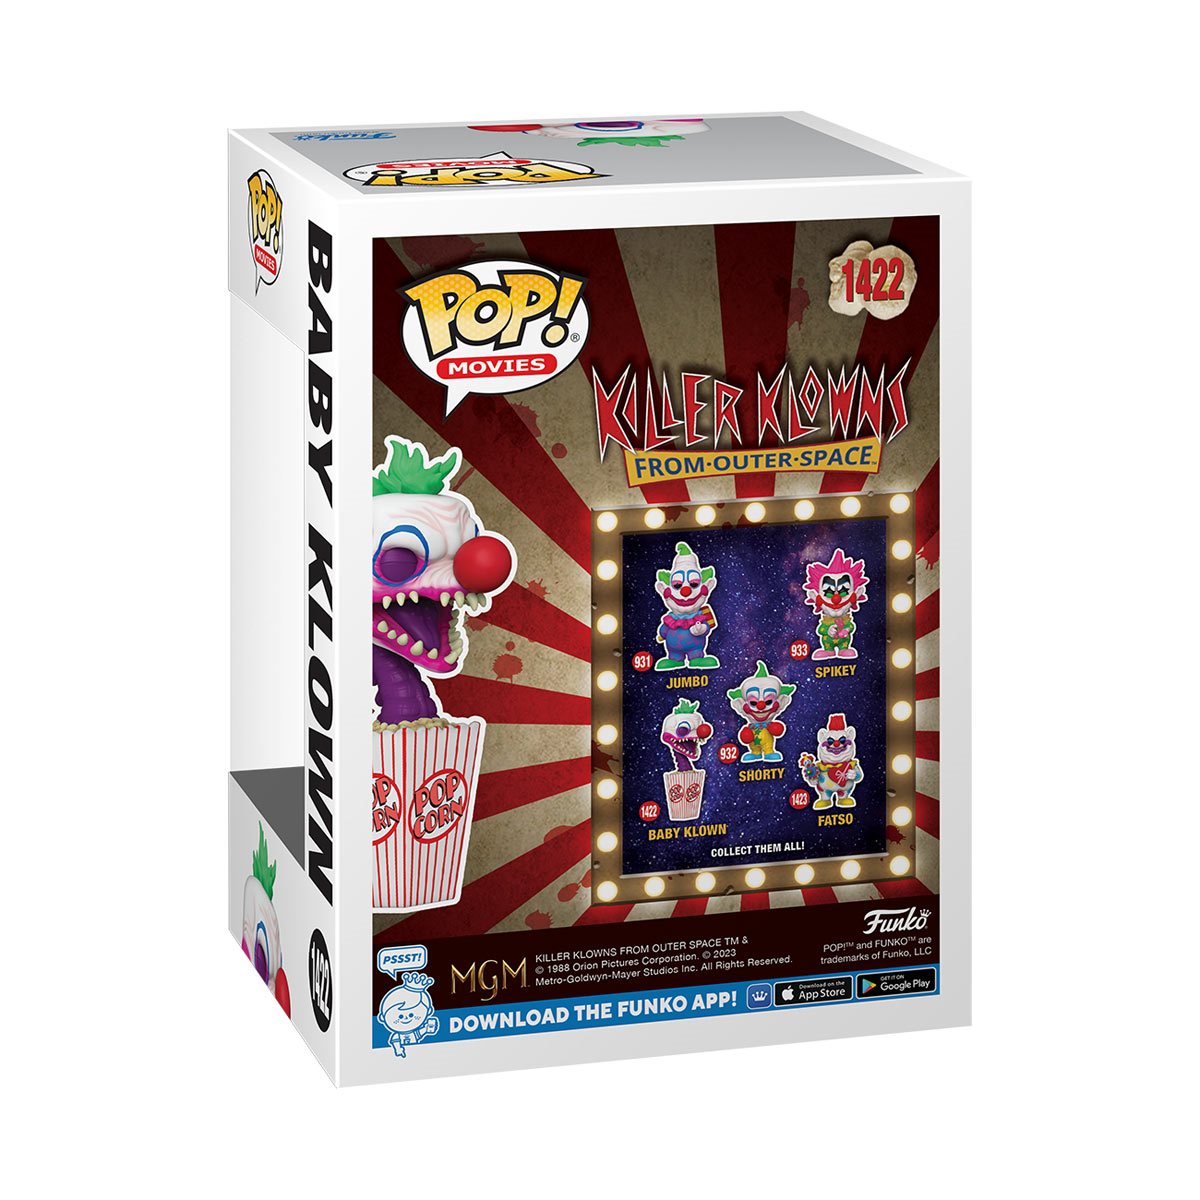 Funko Pop! Killer Klowns from Outer Space - Baby Klown